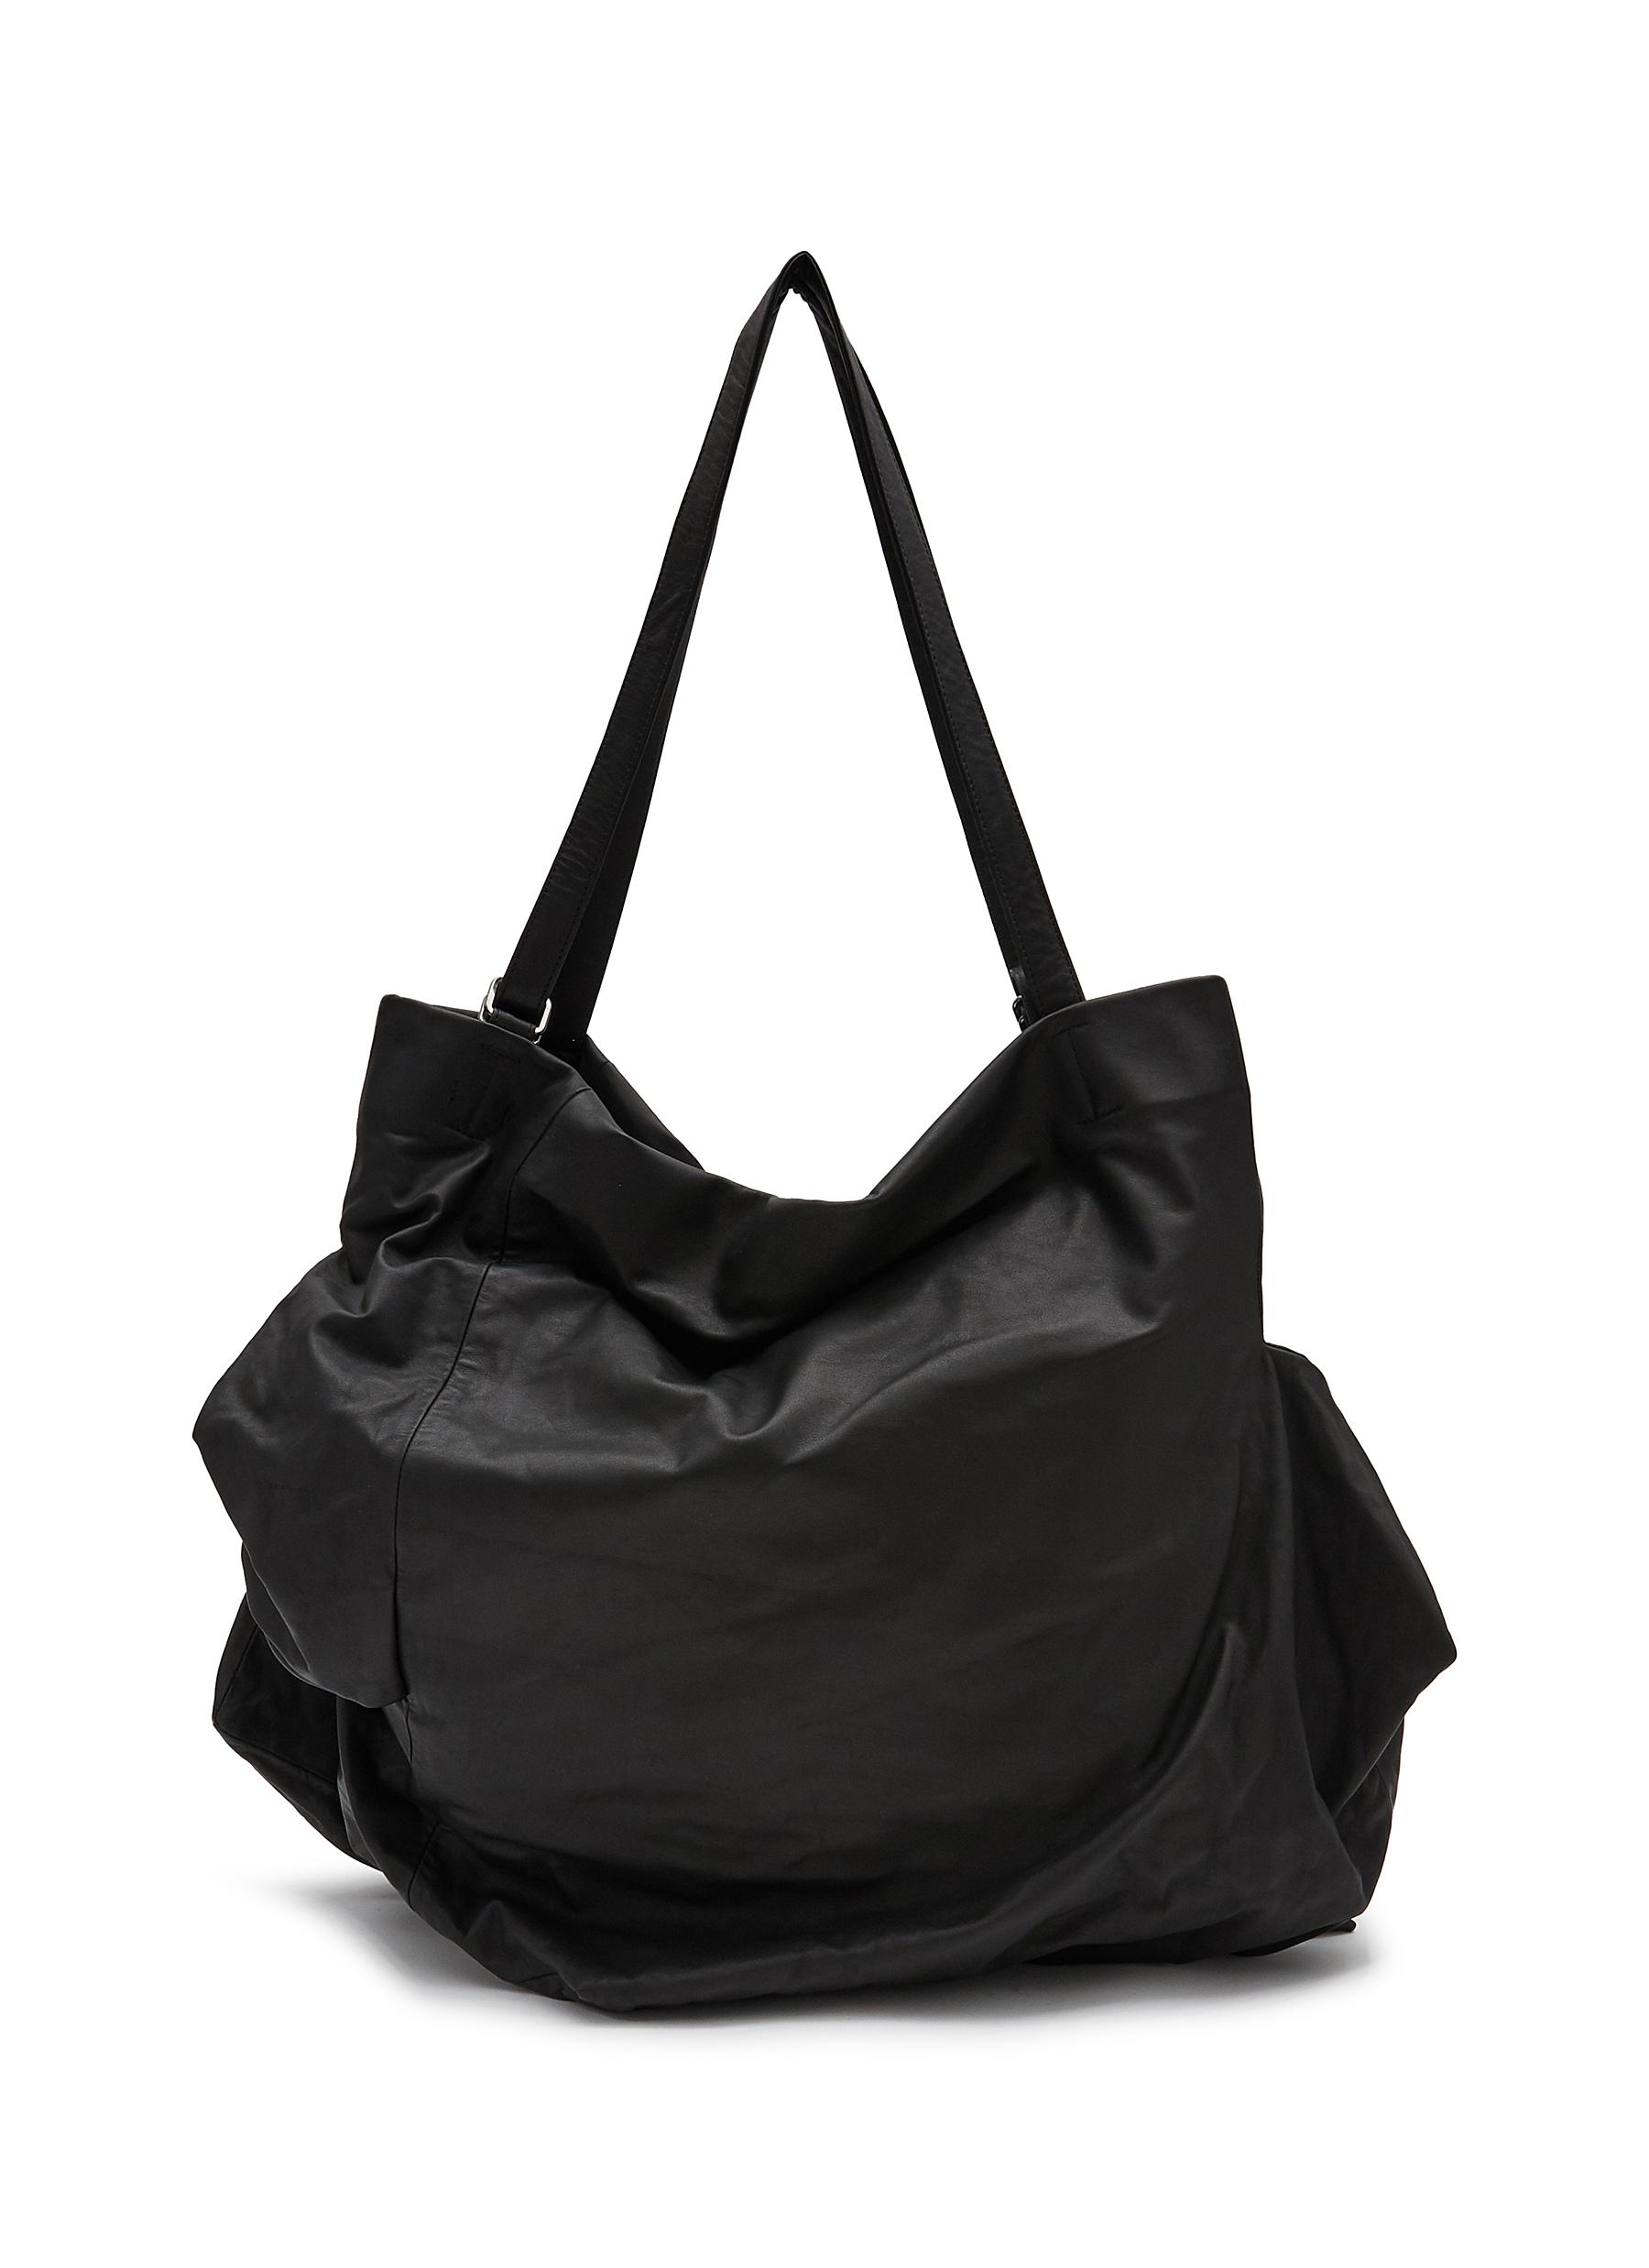 Unevenness Leather Tote Bag